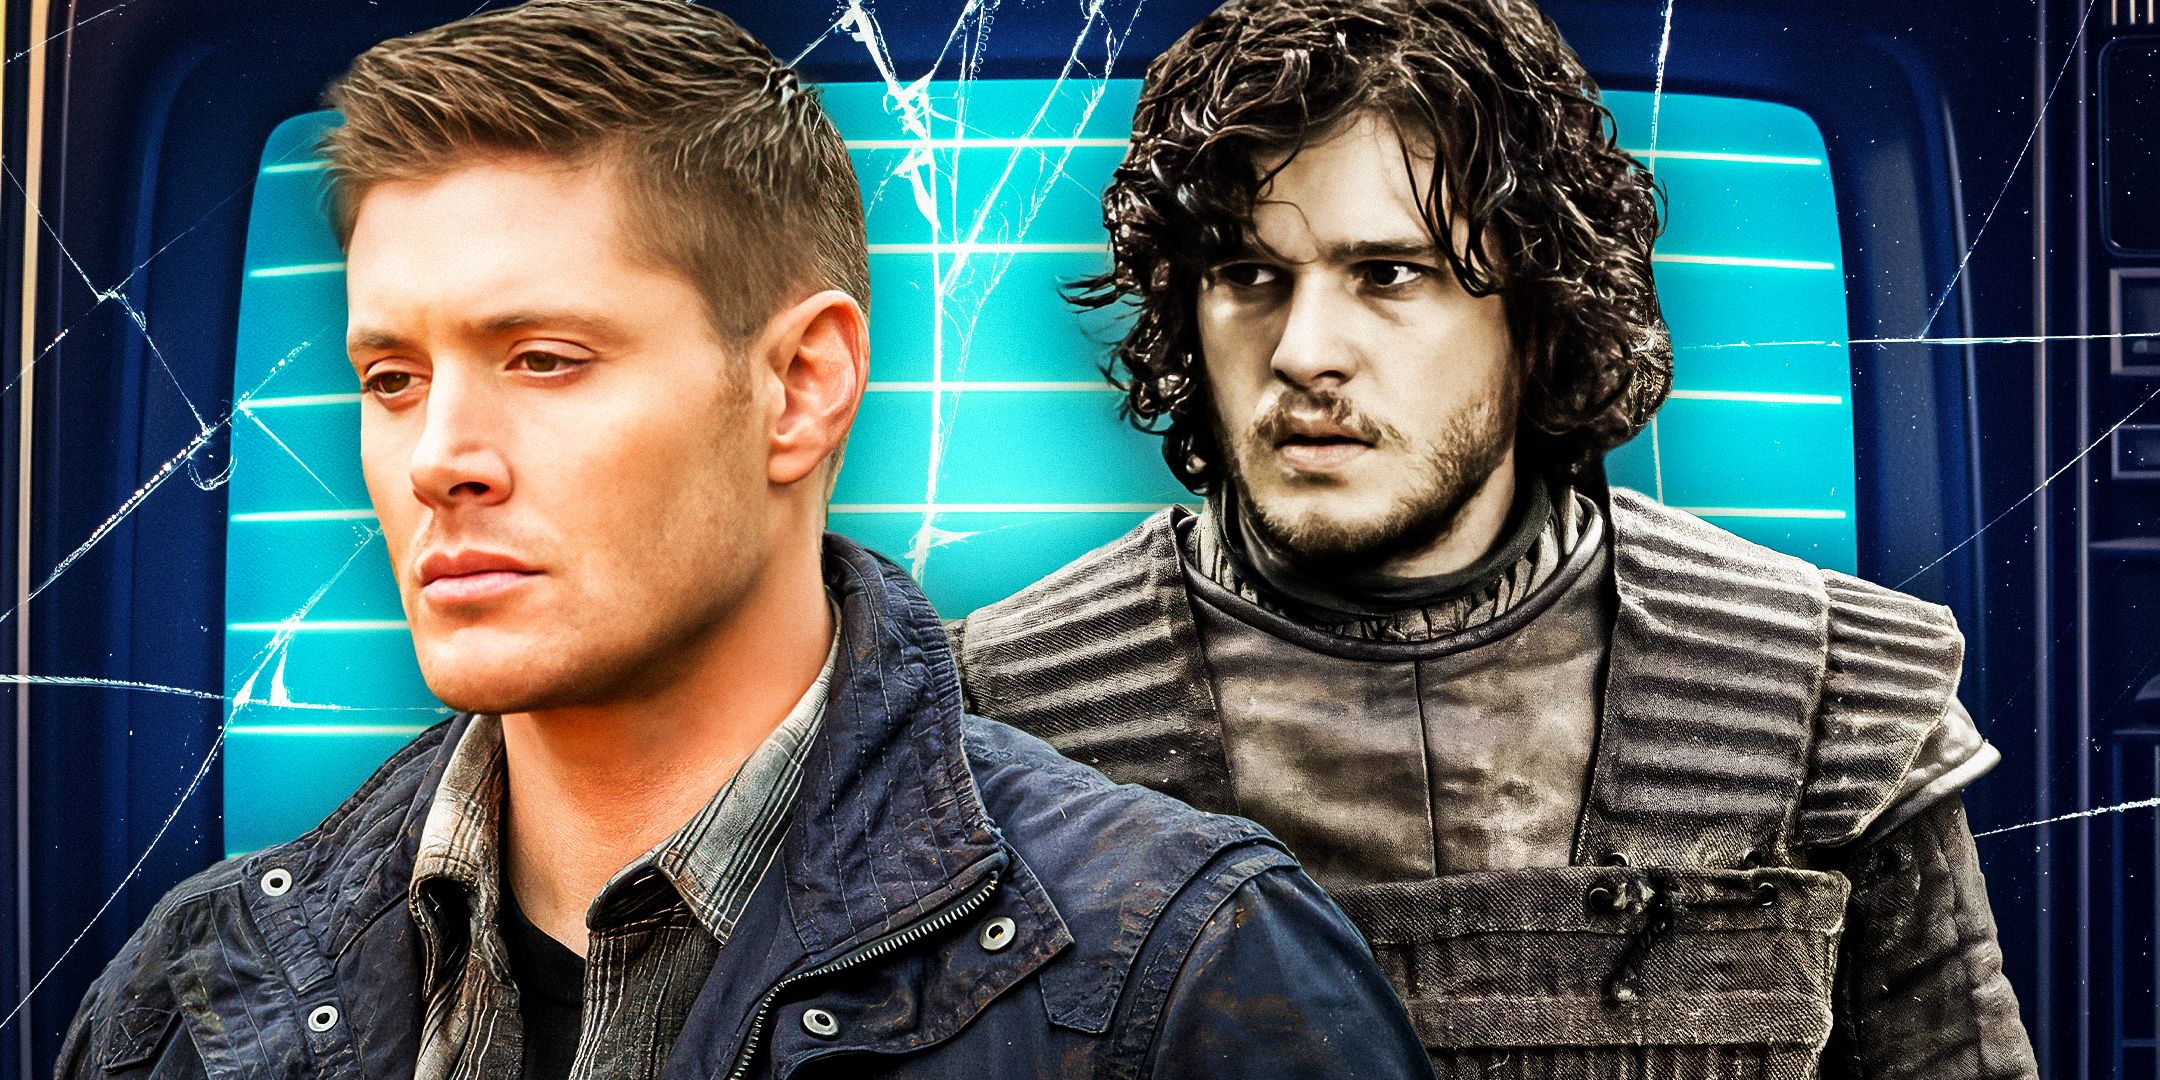 (Kit-Harington-as-Jon-Snow)-from-Game-of-Thrones-and-(Jensen-Ackles-as-Dean-Winchester)-from-Supernatural